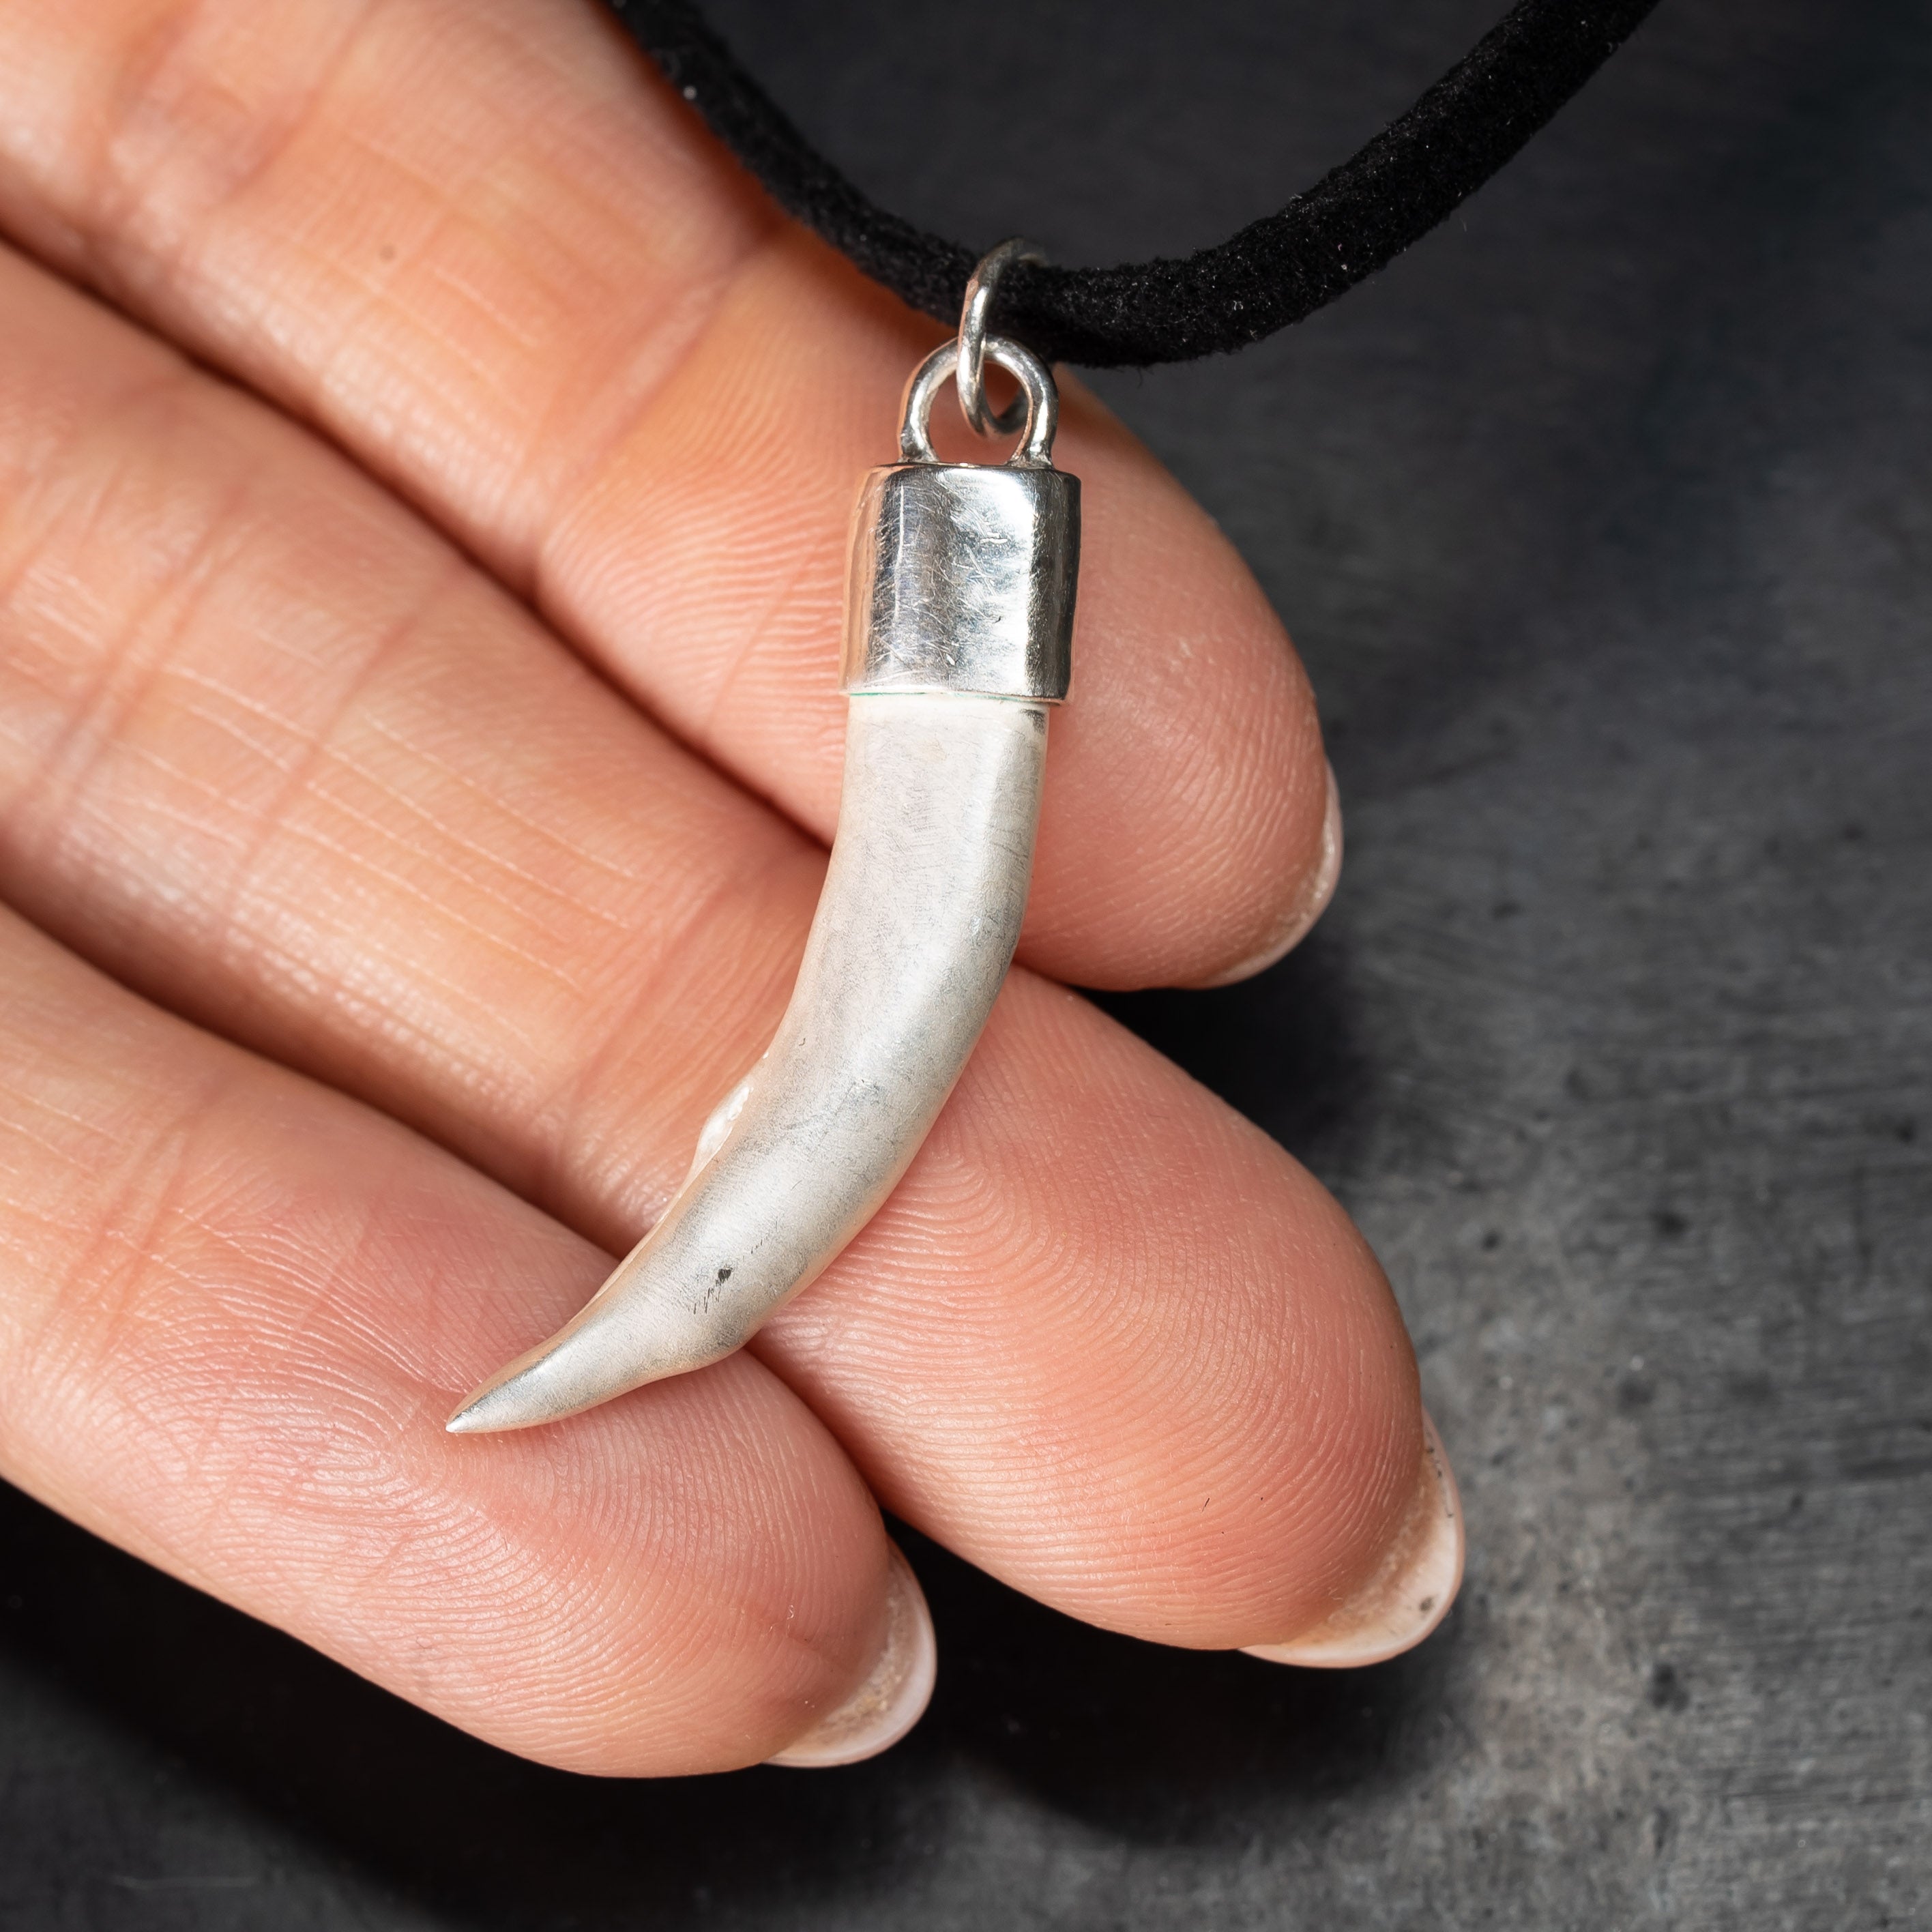 Silver fox tooth necklace showing scale agains the hand